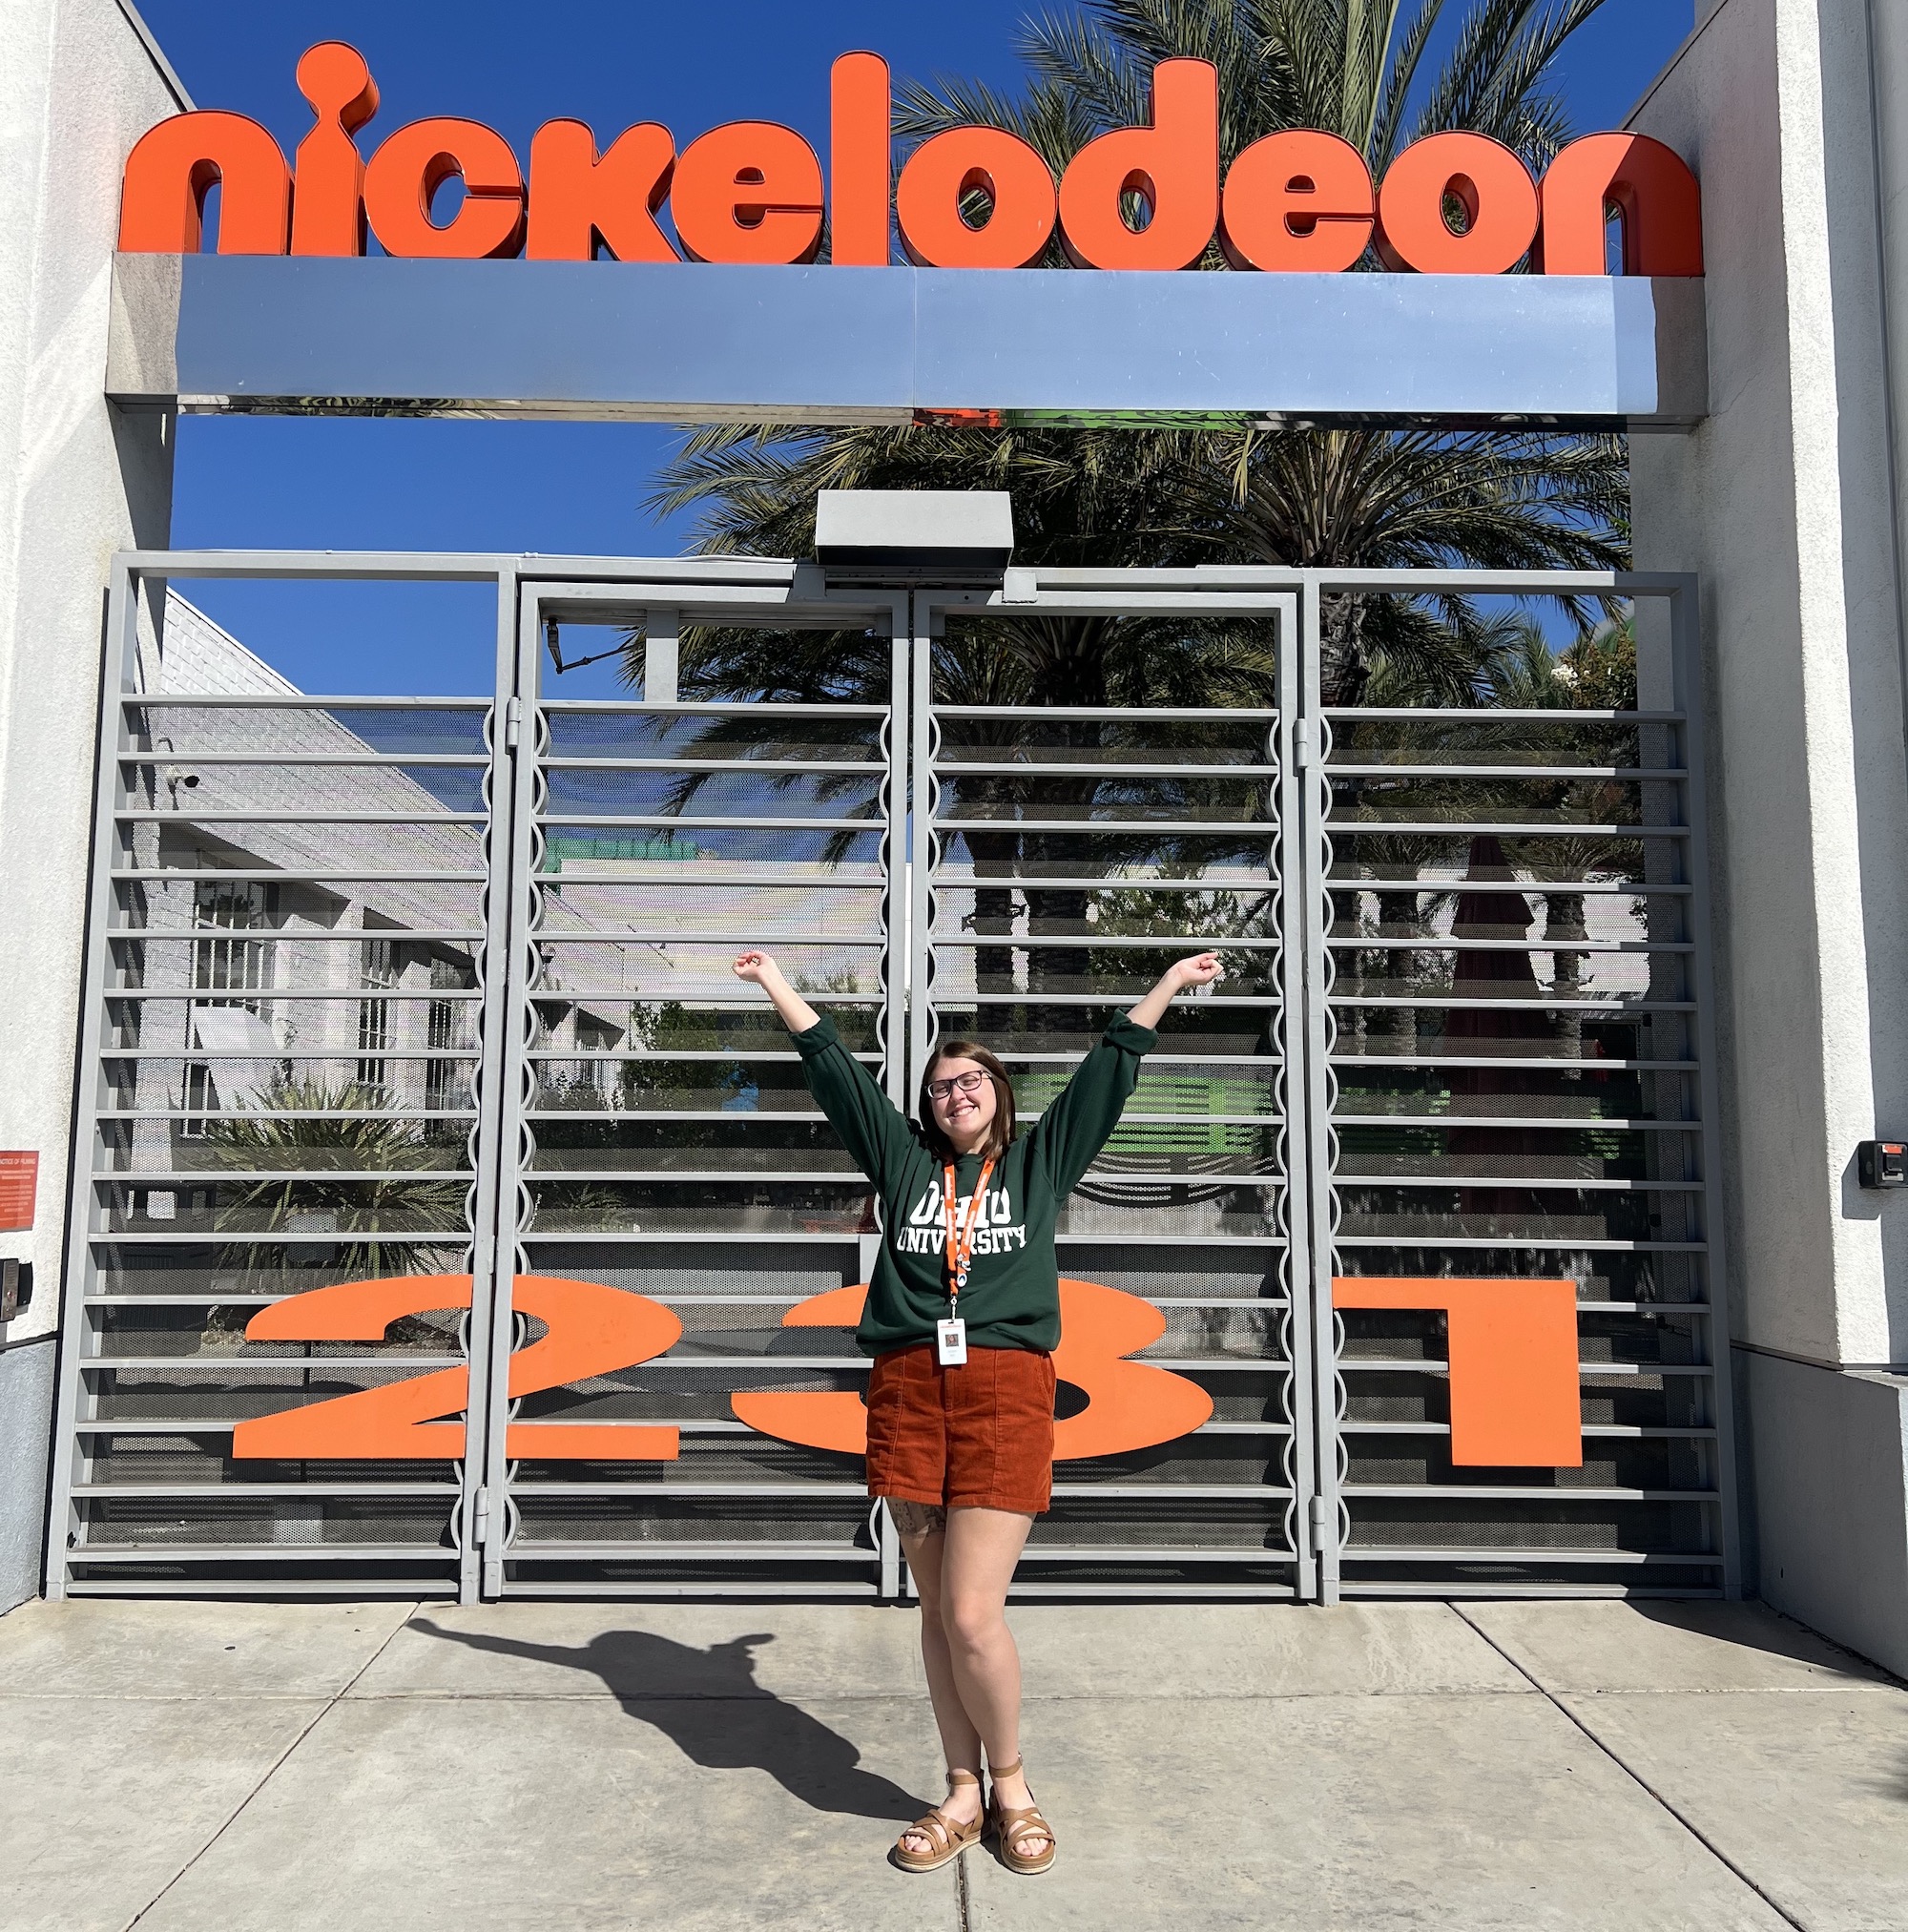 Allison Irey poses with her hands up, wearing an Ohio University sweatshirt outside of a movie gate with "Nickelodeon" on top.